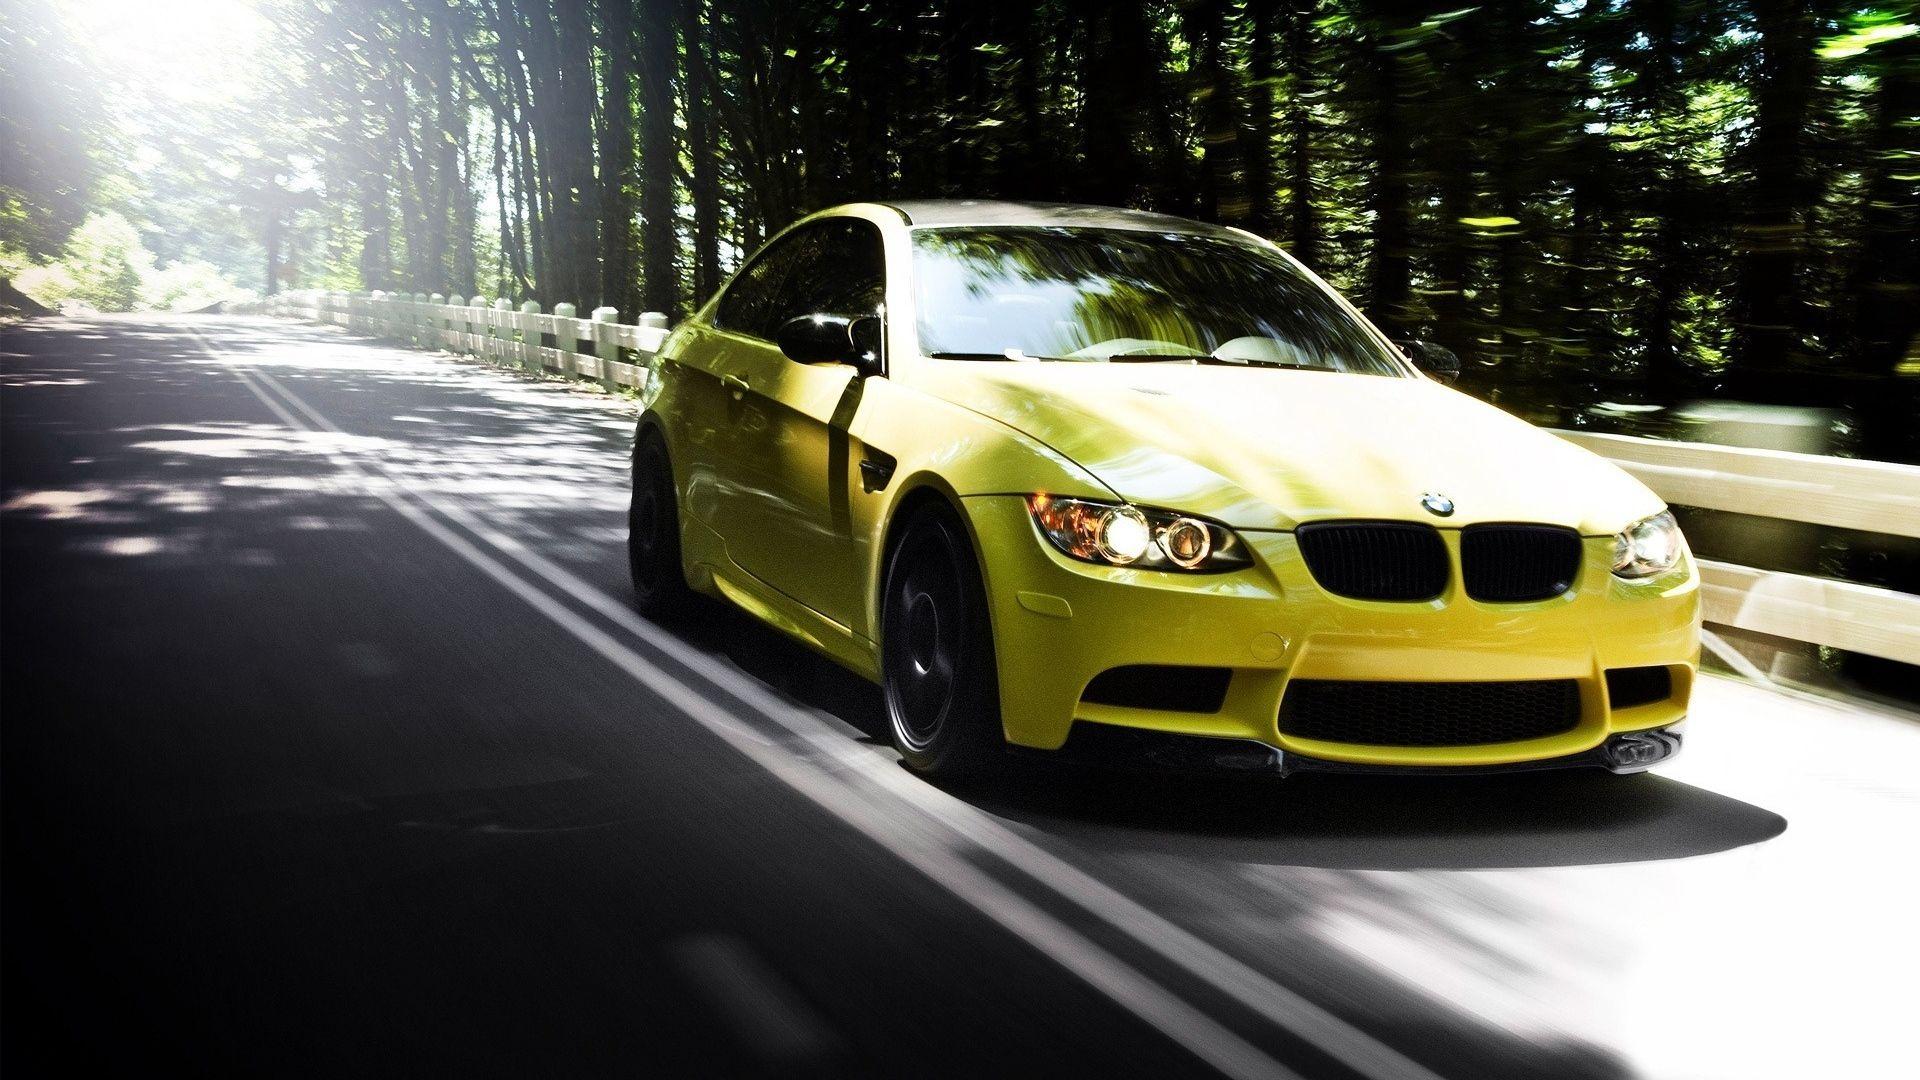 Download Wallpaper 1920x1080 auto, bmw m yellow, road, forest